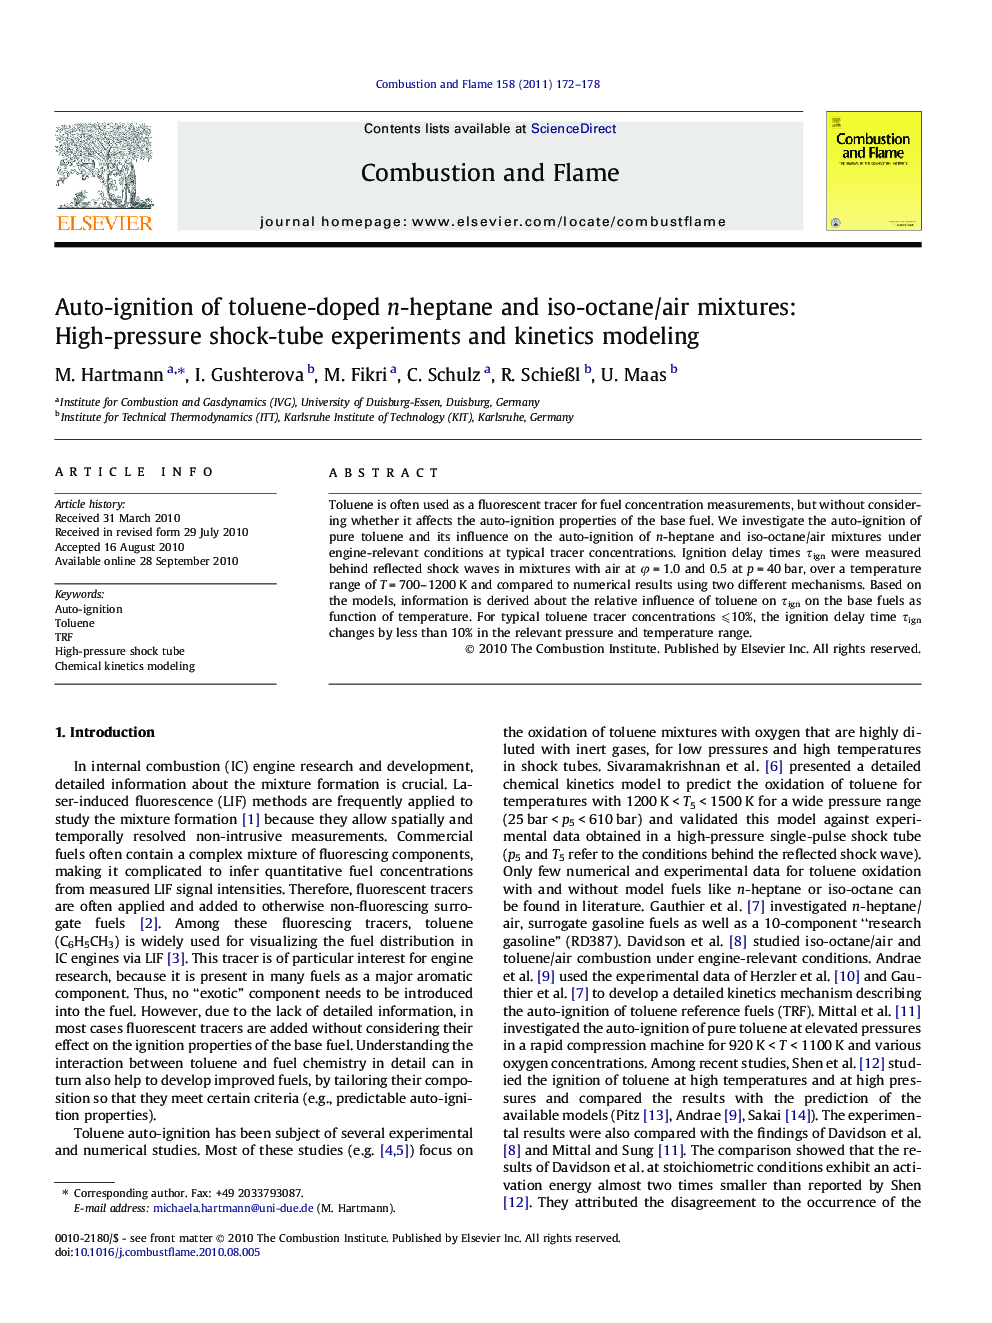 Auto-ignition of toluene-doped n-heptane and iso-octane/air mixtures: High-pressure shock-tube experiments and kinetics modeling